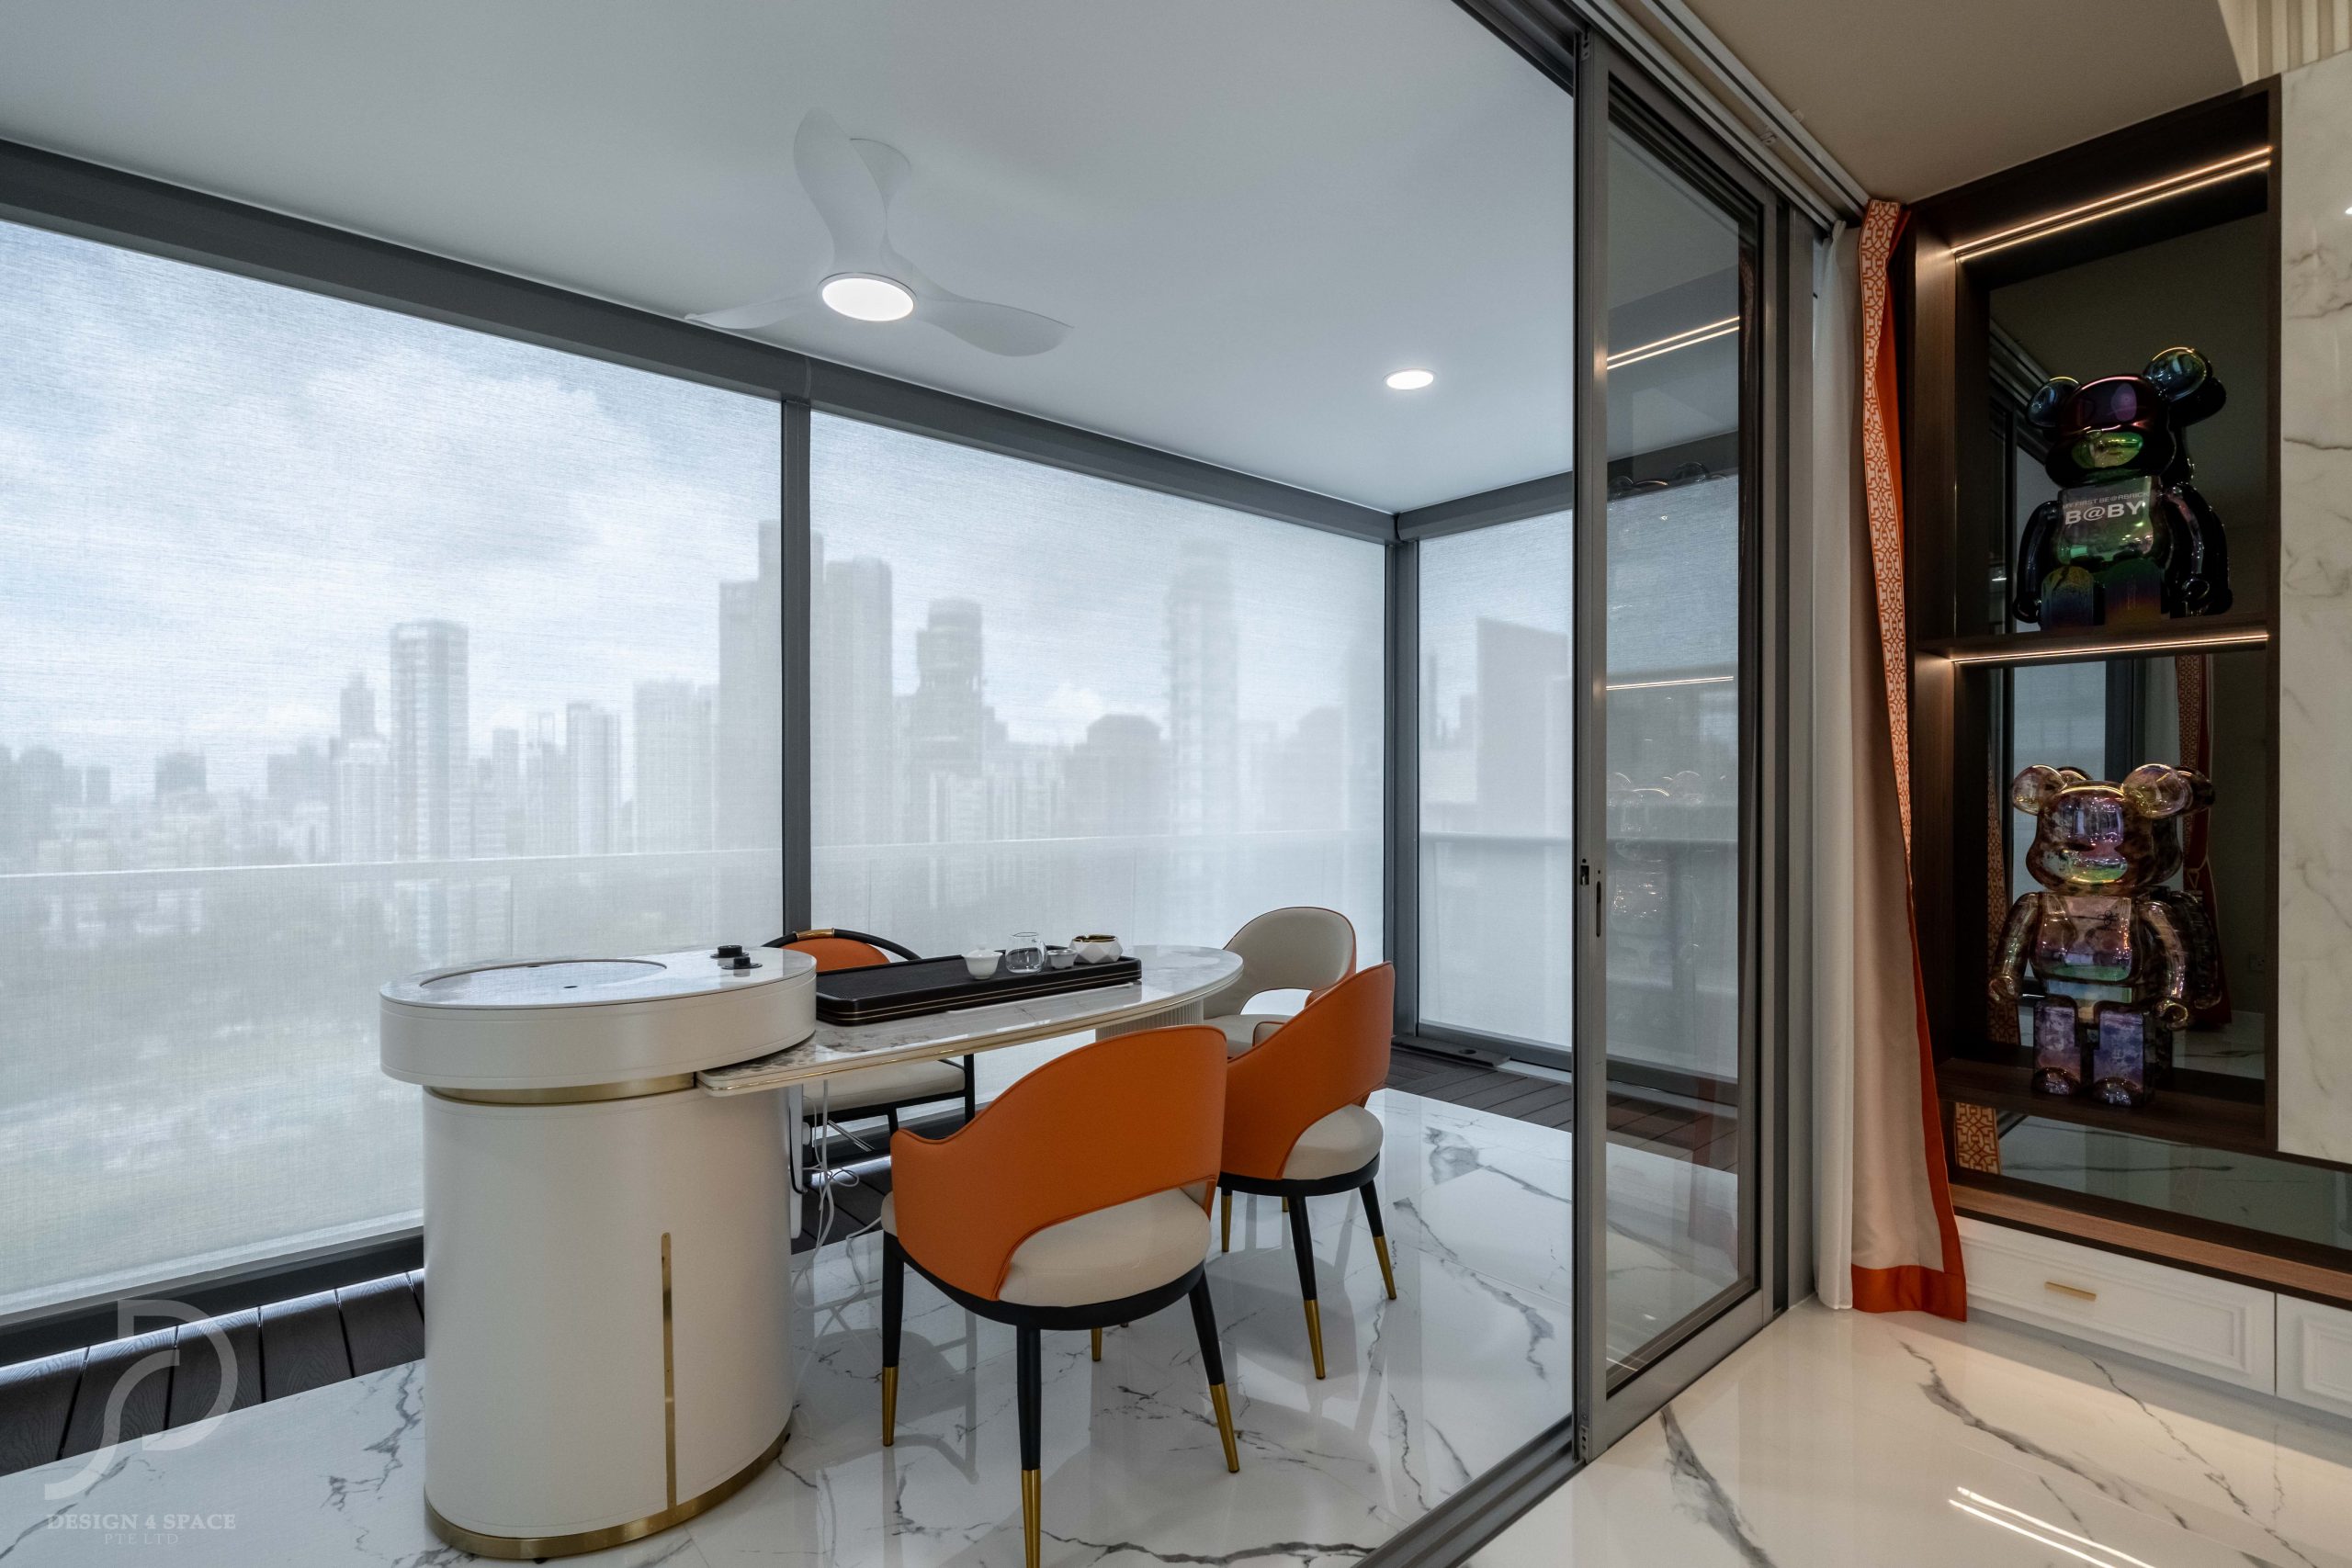 419 - paterson suites - jianwen - tpy - watermark21